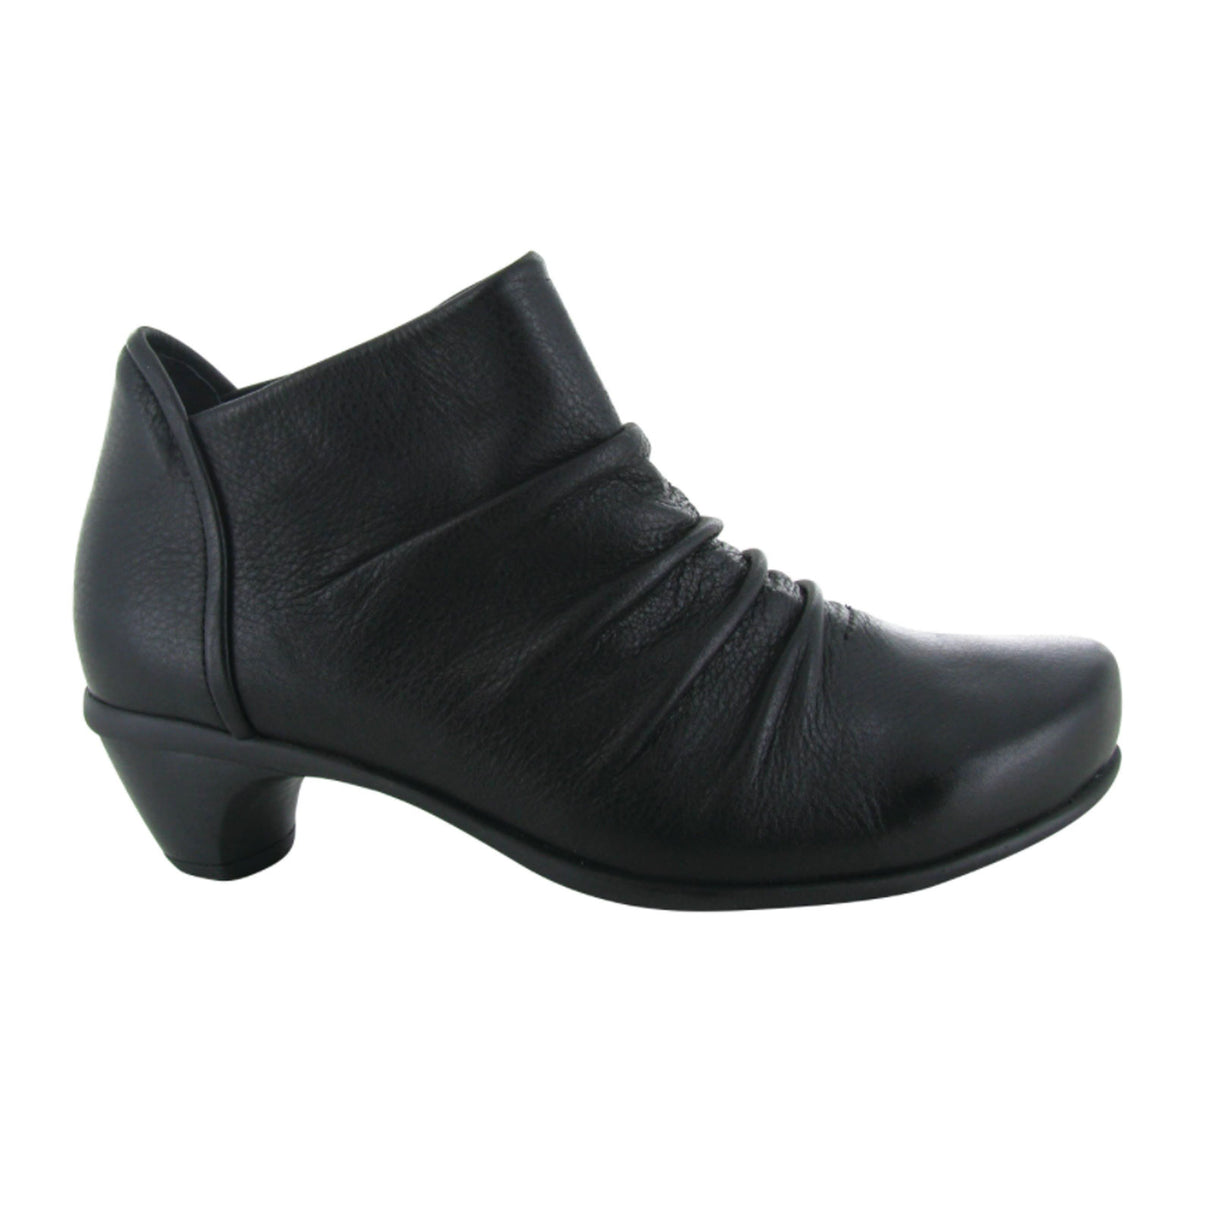 Naot Advance Heeled Ankle Boot (Women) - Black Boots - Fashion - Ankle Boot - The Heel Shoe Fitters